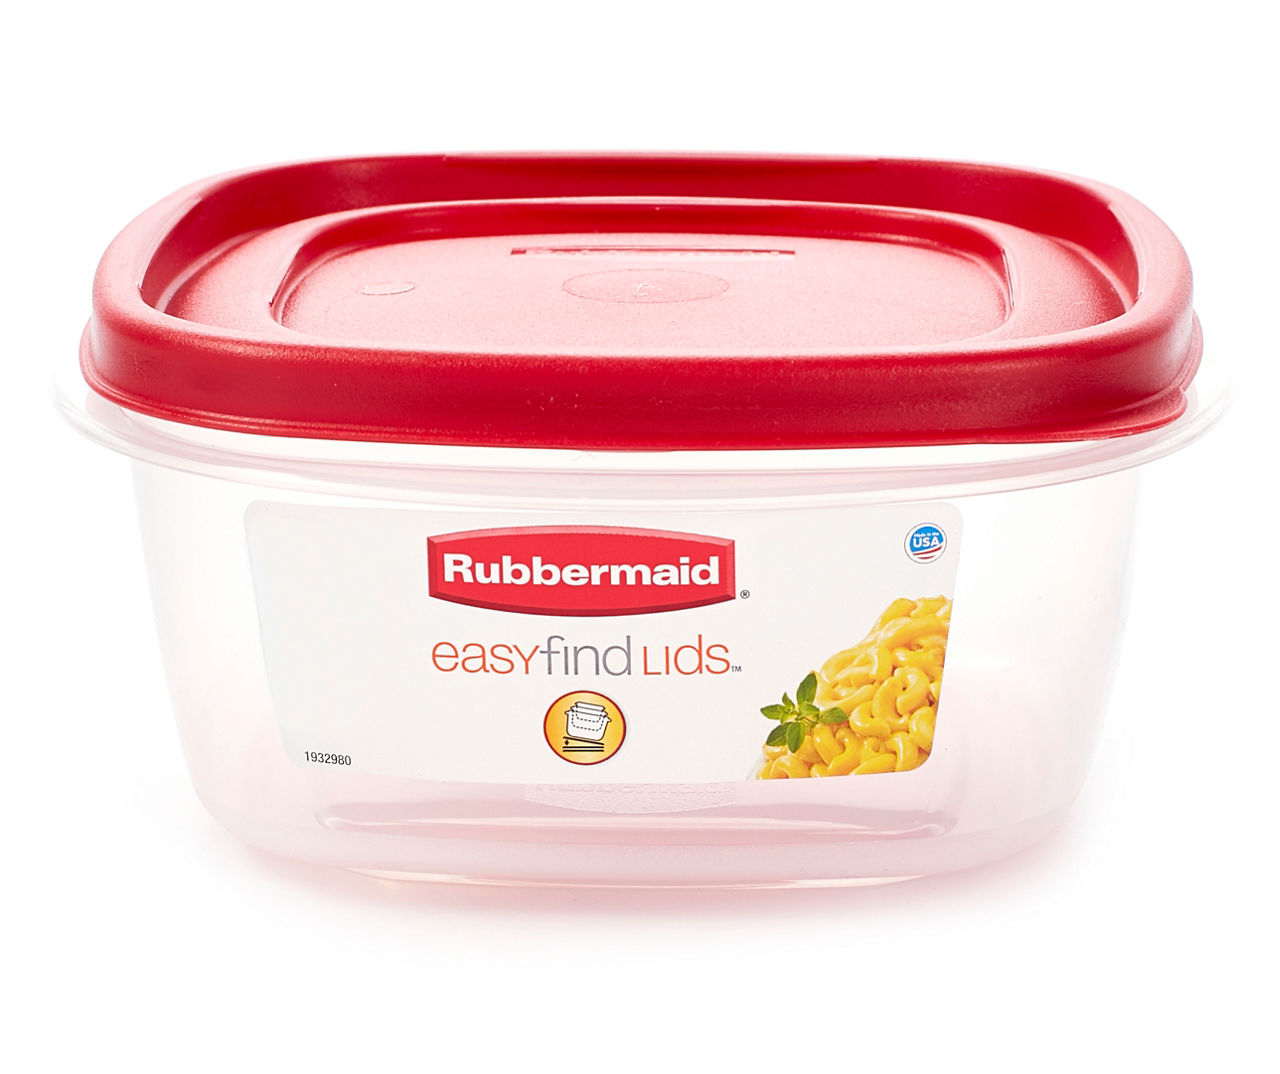 Rubbermaid Premier Easy Find Lids 5-Cup Food Storage Container